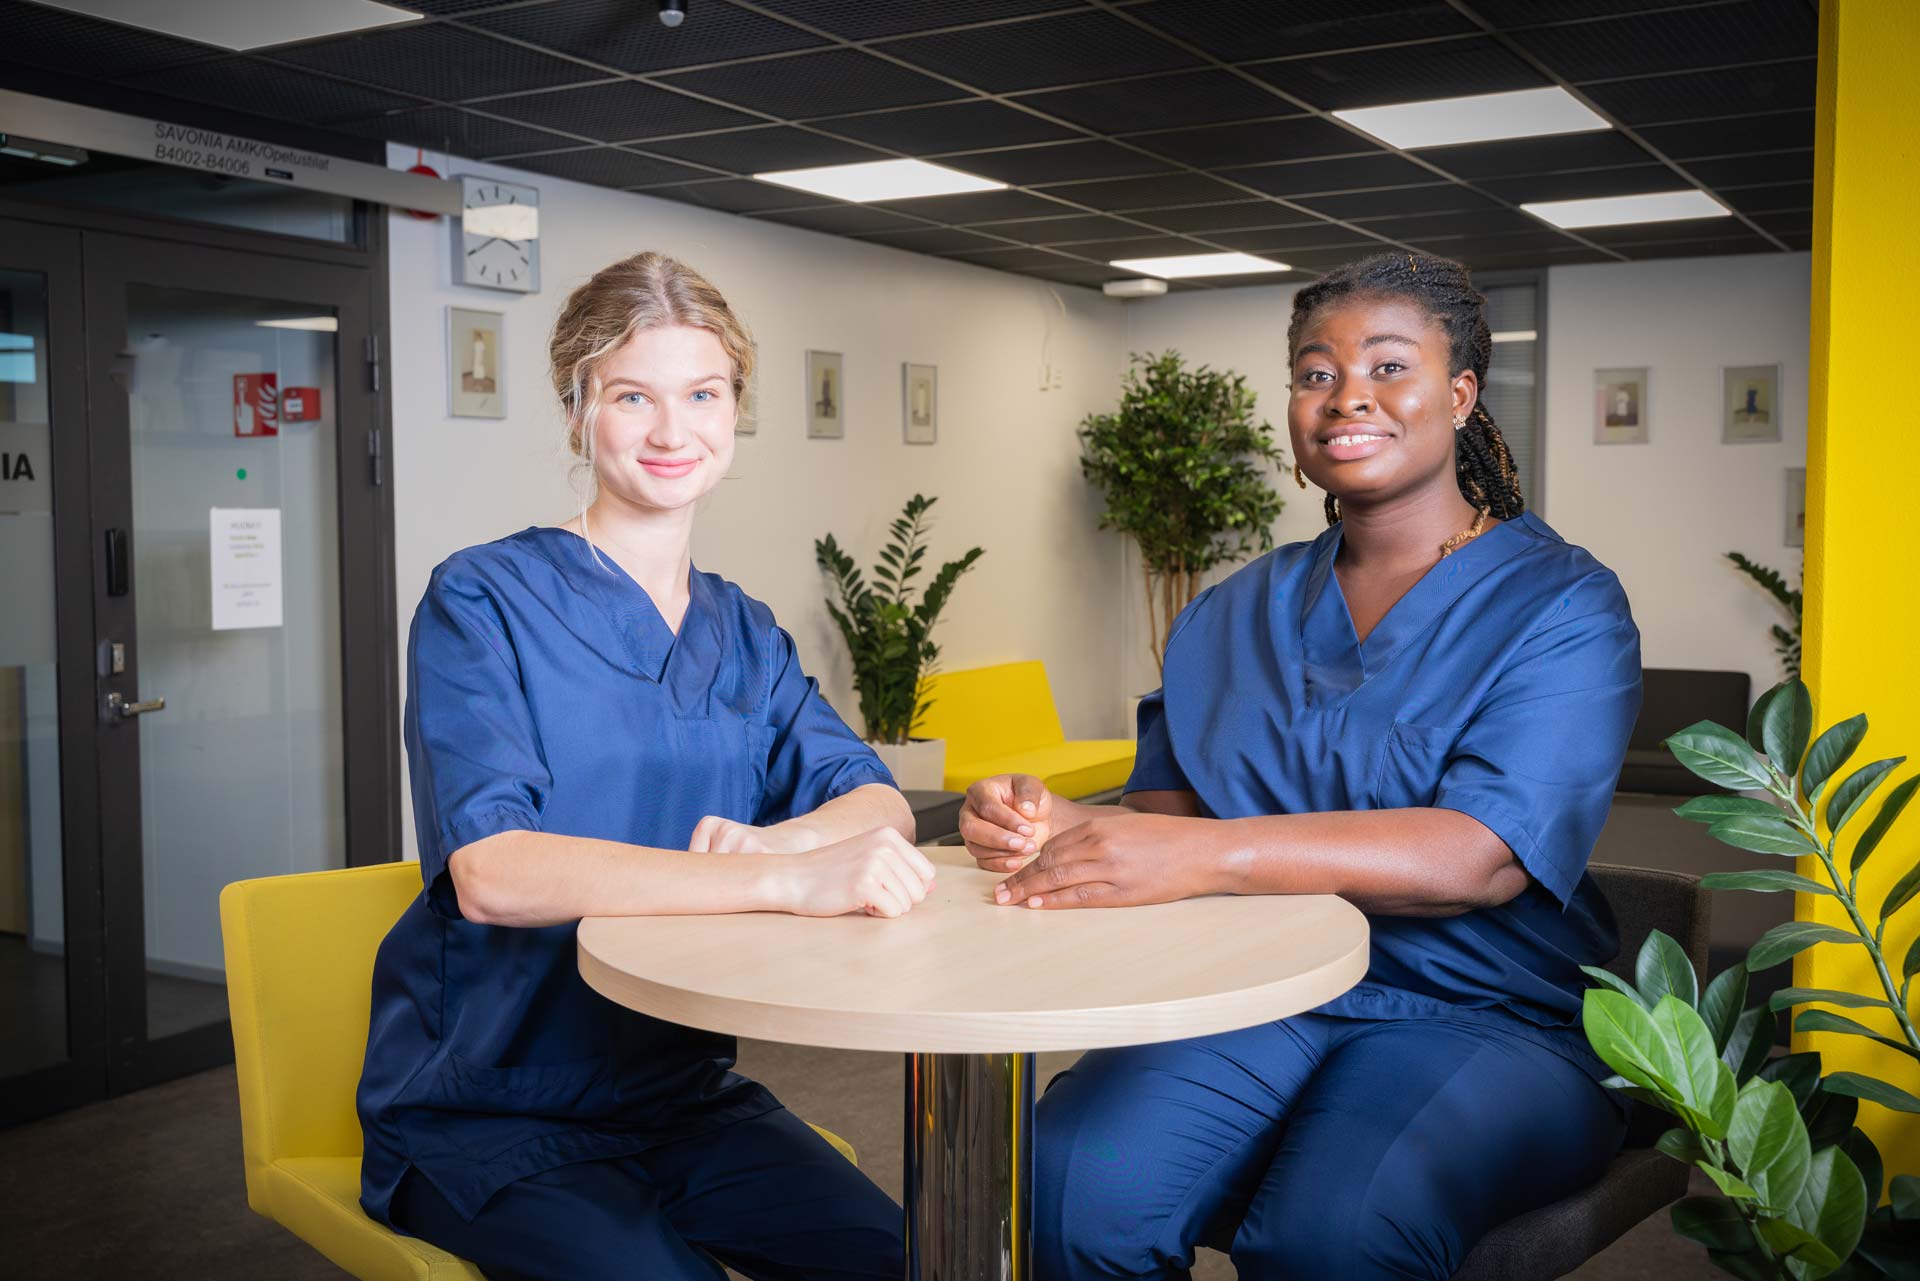 Two nursing students smiling and sitting by a table.